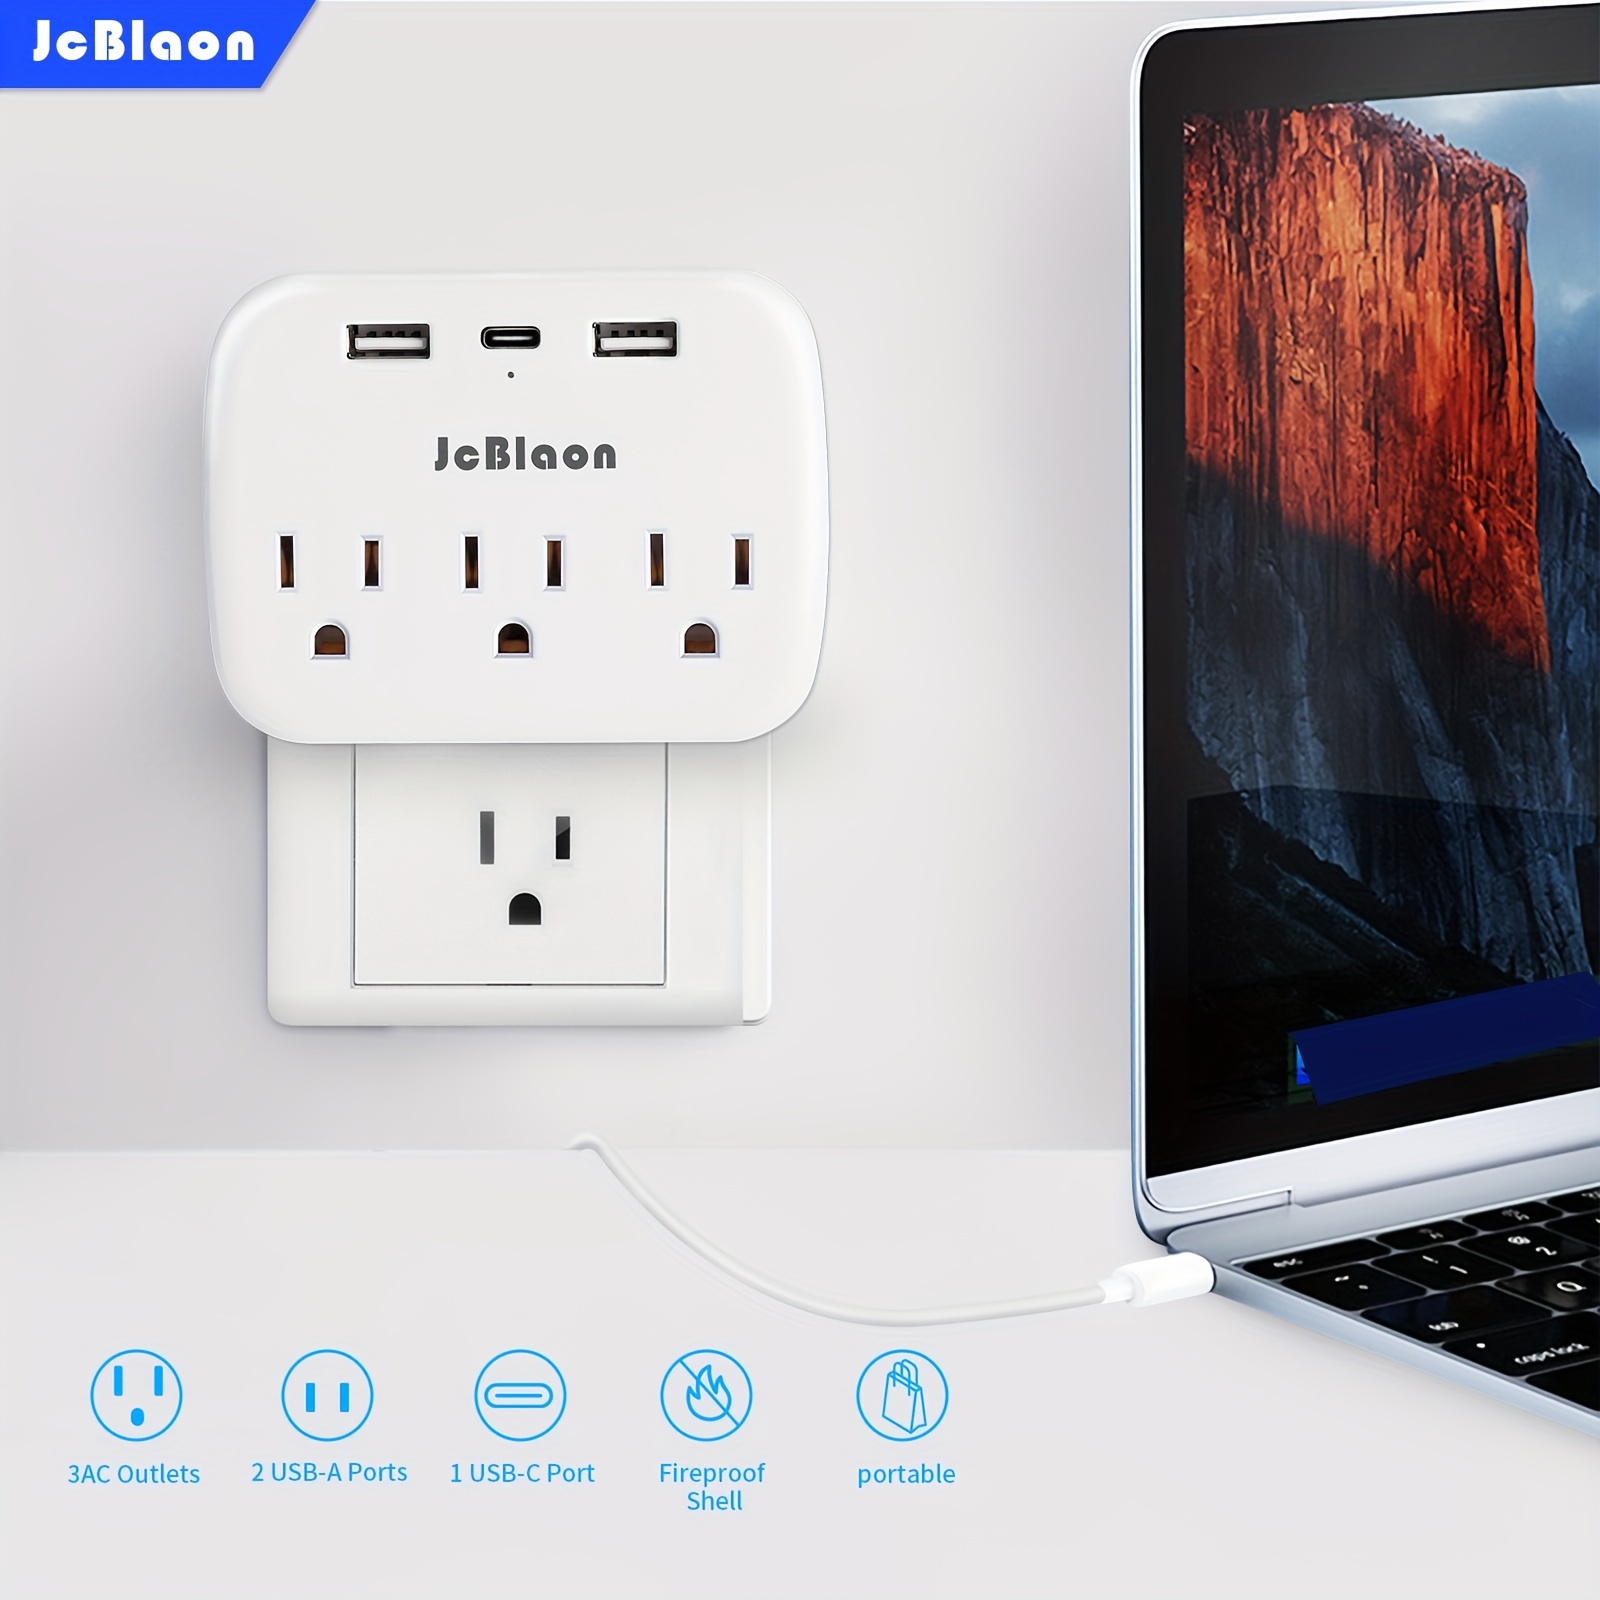 

Multi Plug Outlet Extender With Usb, Electrical Wall Outlet Splitter With 3 Usb Ports (1 Usb C) And 3 Outlet, Wall Charger Adapter Power Strips For Office, Bedside, Travel